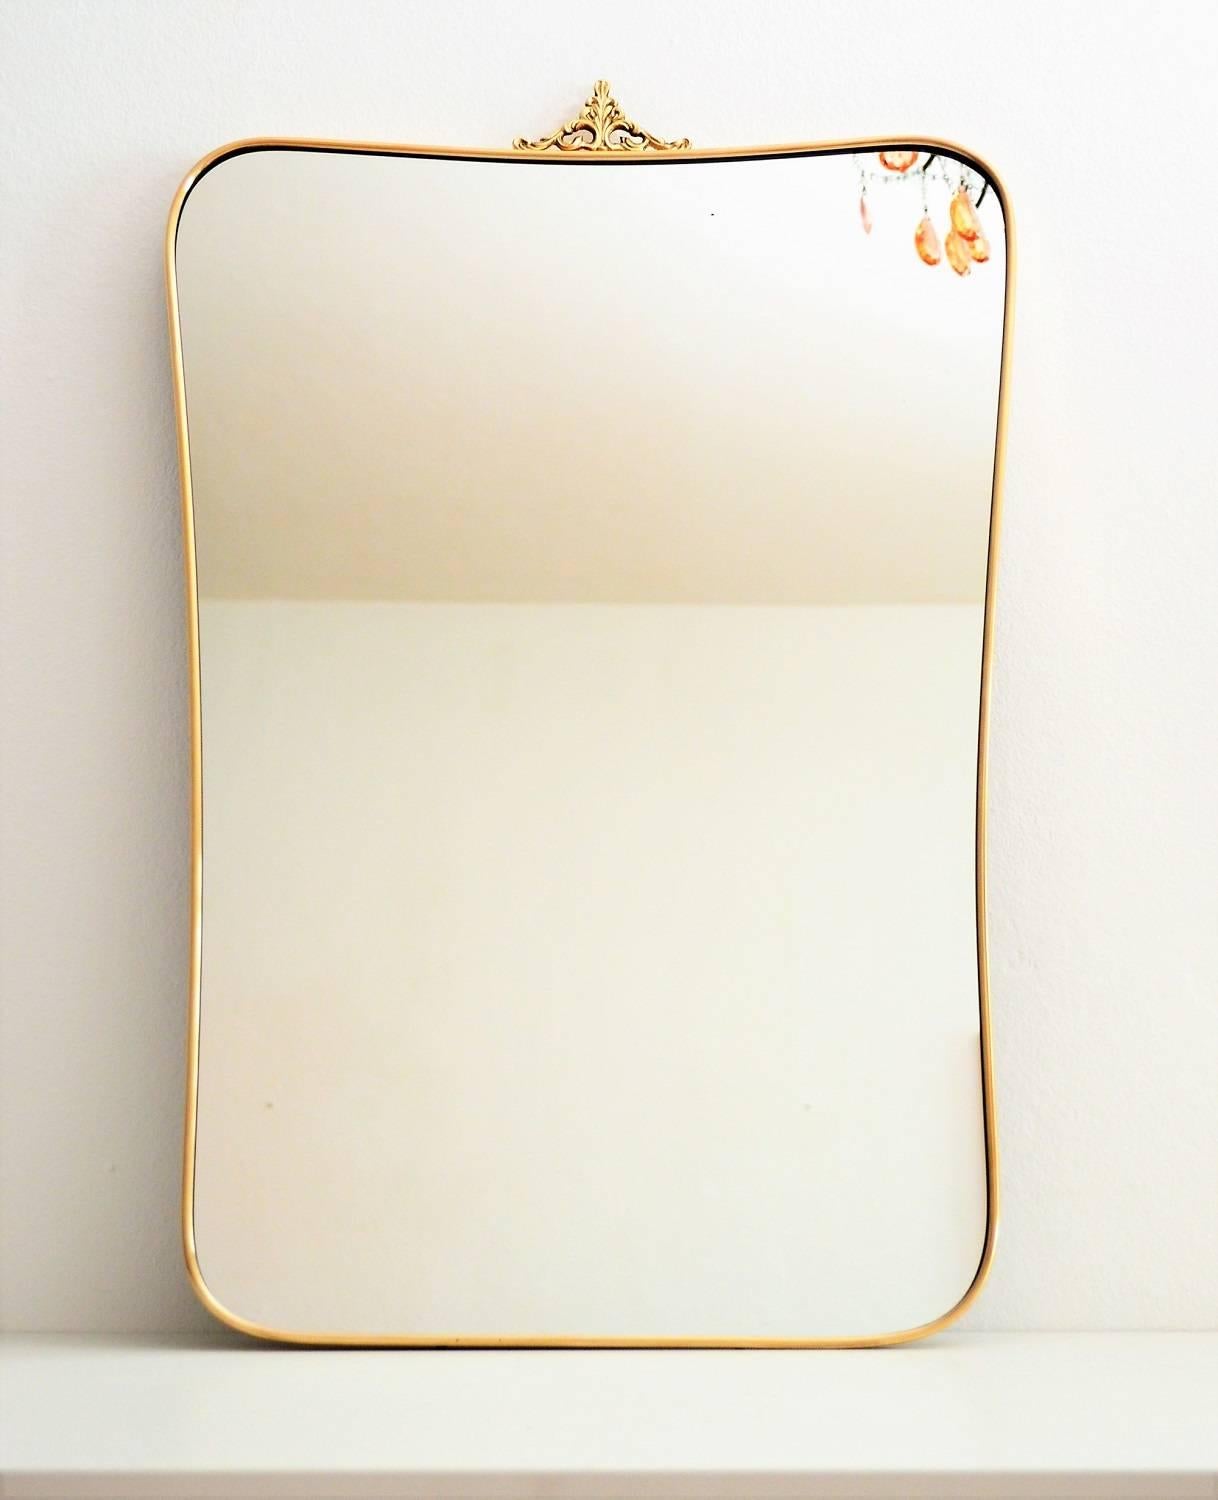 Beautiful crystal glass wall mirror with brass frame, typical for the Italian Mid-Century Modern age.
Made in Italy, circa 1950s.
The small golden metal decoration on the top of the mirror can be removed ( hold from 2 screws) if desired. We left it